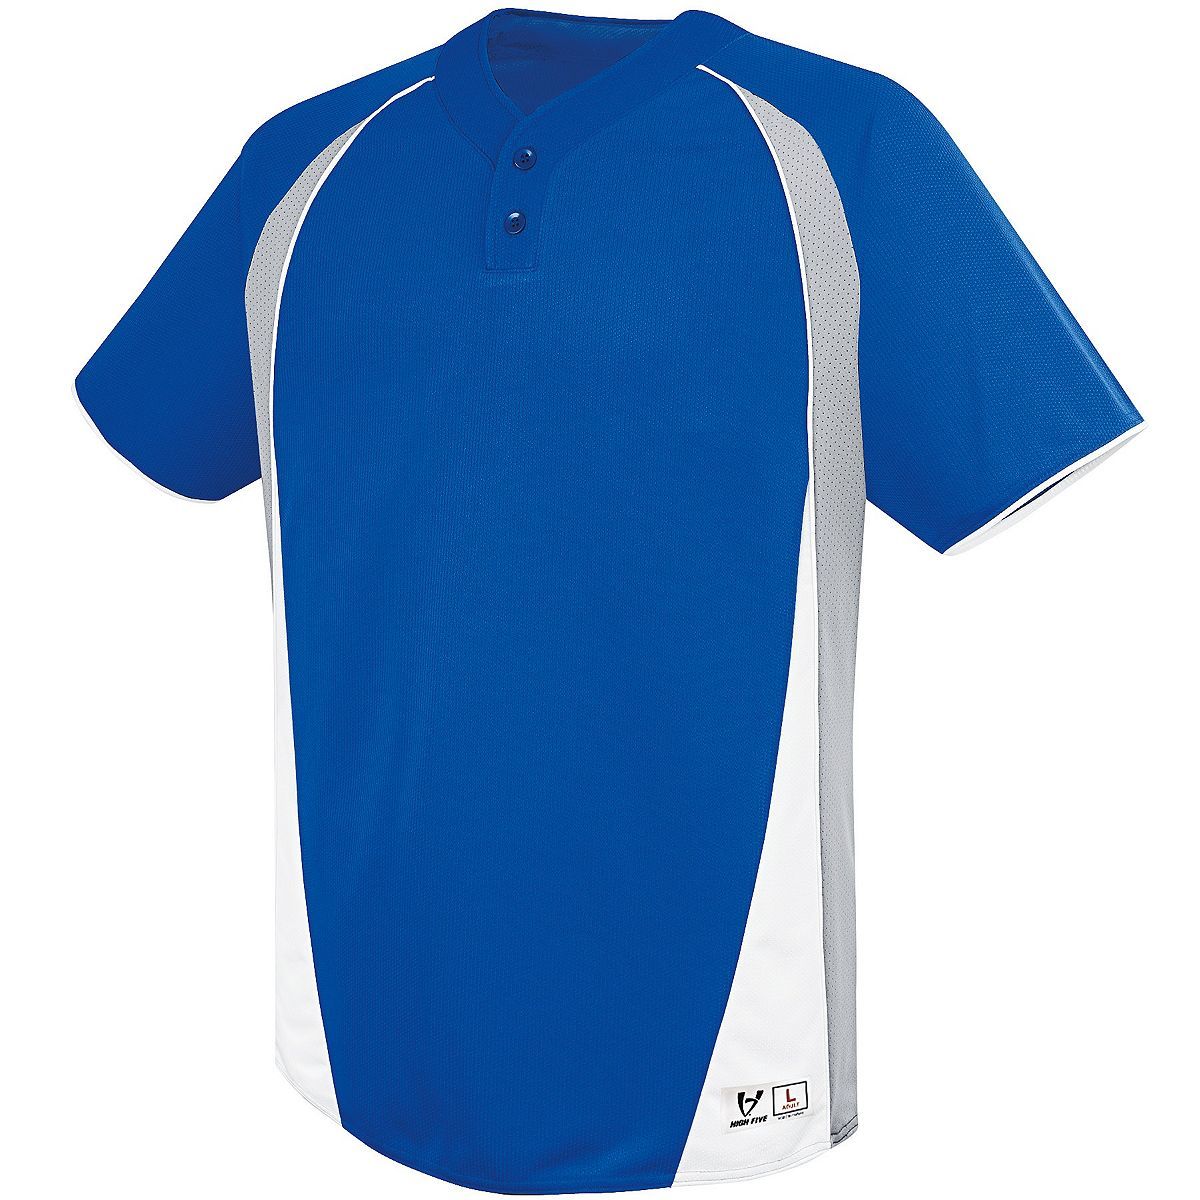 Augusta Sportswear Youth Ace Two-Button Jersey in Royal/Silver Grey/White  -Part of the Youth, Youth-Jersey, Augusta-Products, Baseball, Shirts, All-Sports, All-Sports-1 product lines at KanaleyCreations.com